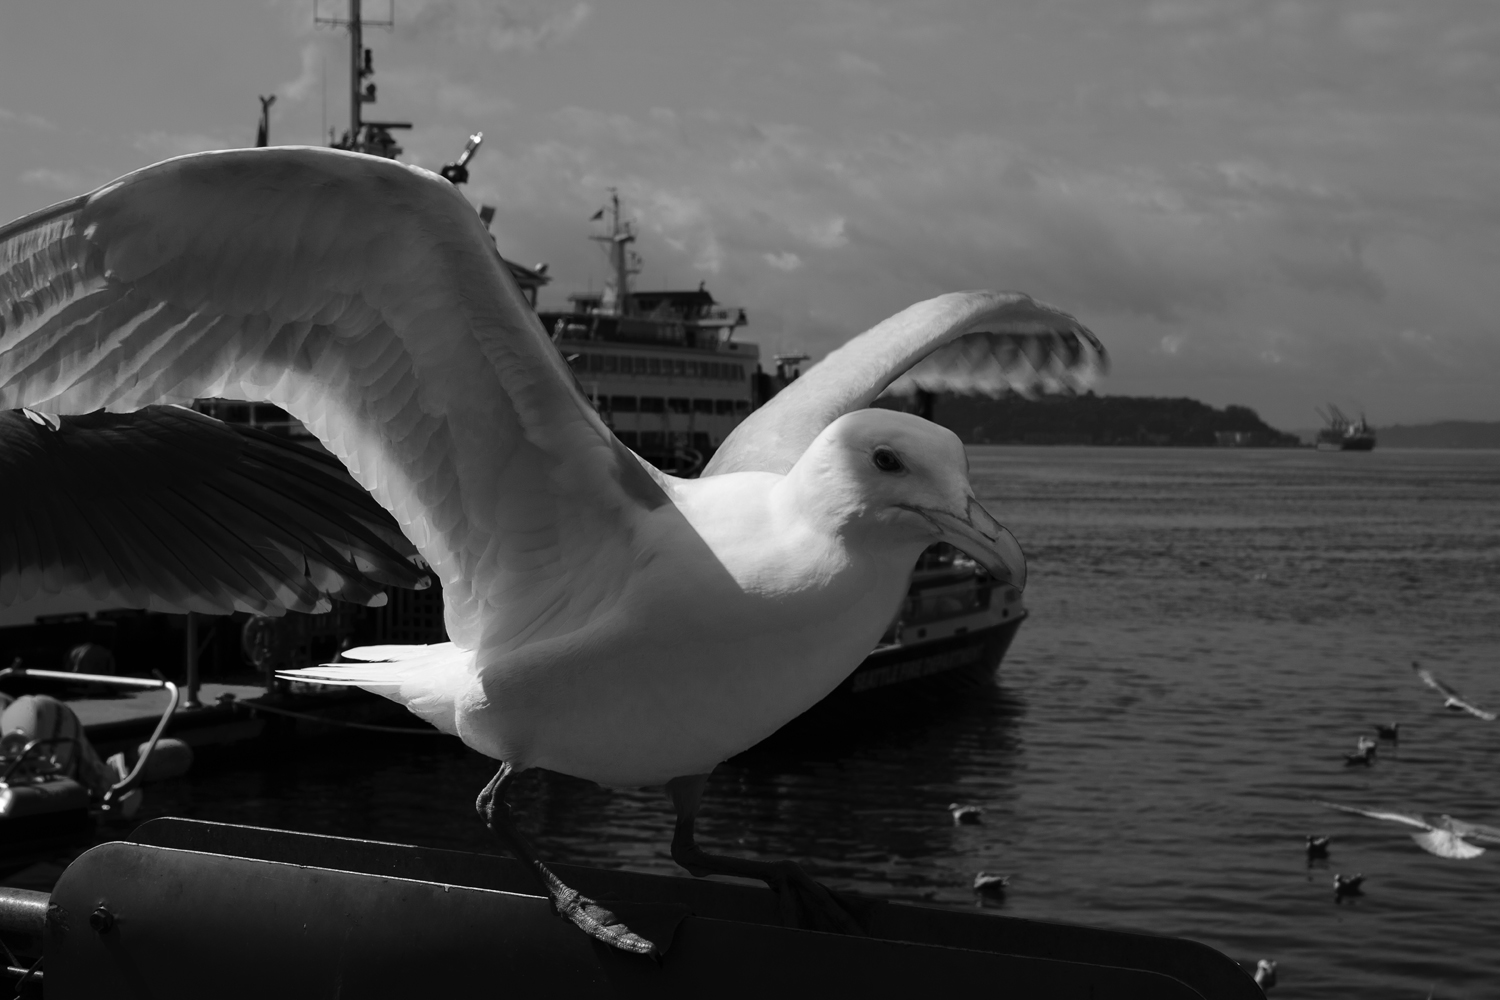 The Waterfront Gull